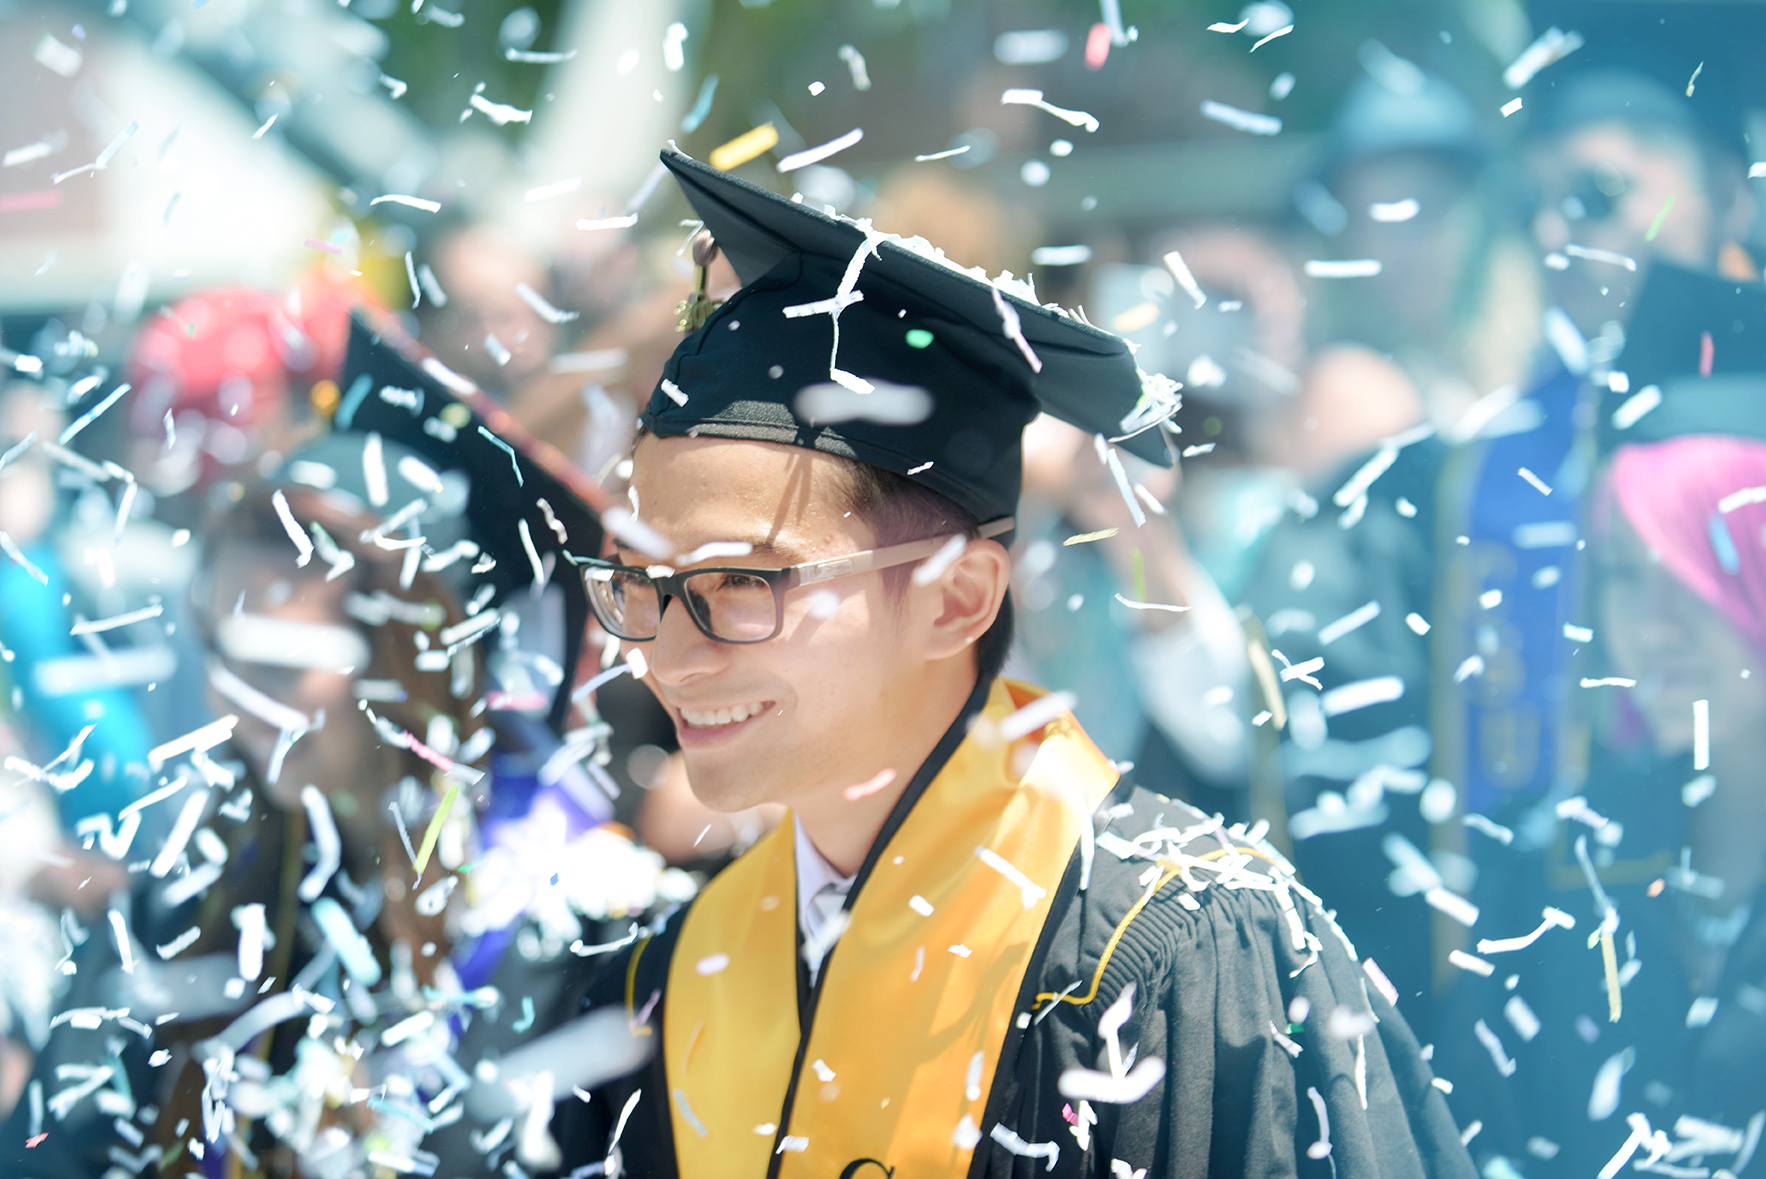 Student at Graduation with Confetti 